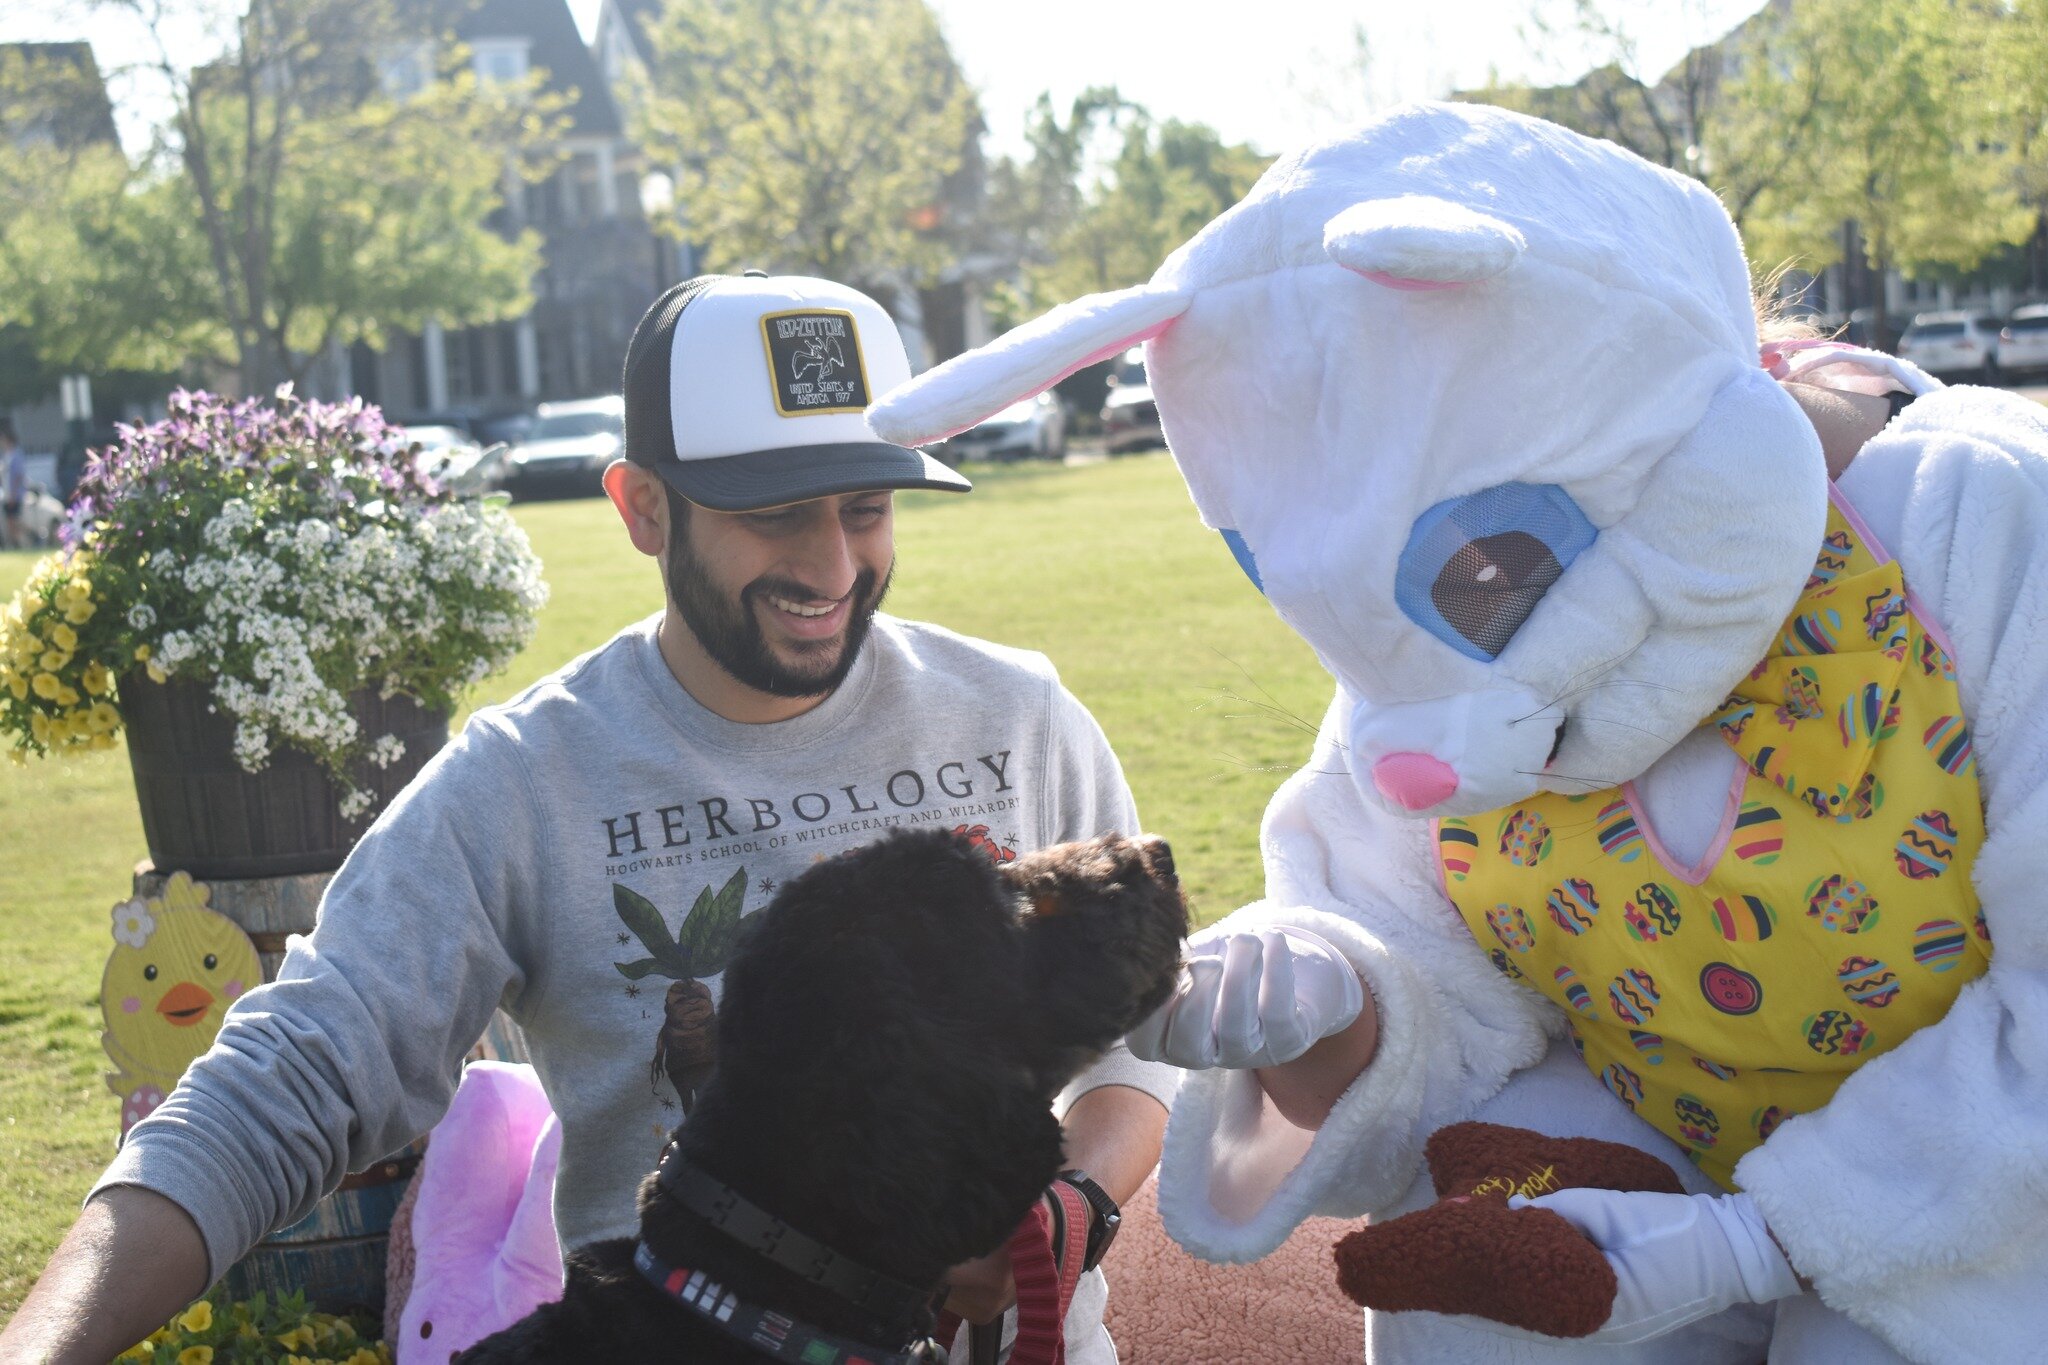 Coppell Humane Society wishes you a joyful Easter! 🐰 Last weekend, our Easter bunny photo fundraiser at Coppell Farmers Market had a fantastic turn-out, with great community involvement, many positive comments, and so much fun! Lots of kiddos, lots 